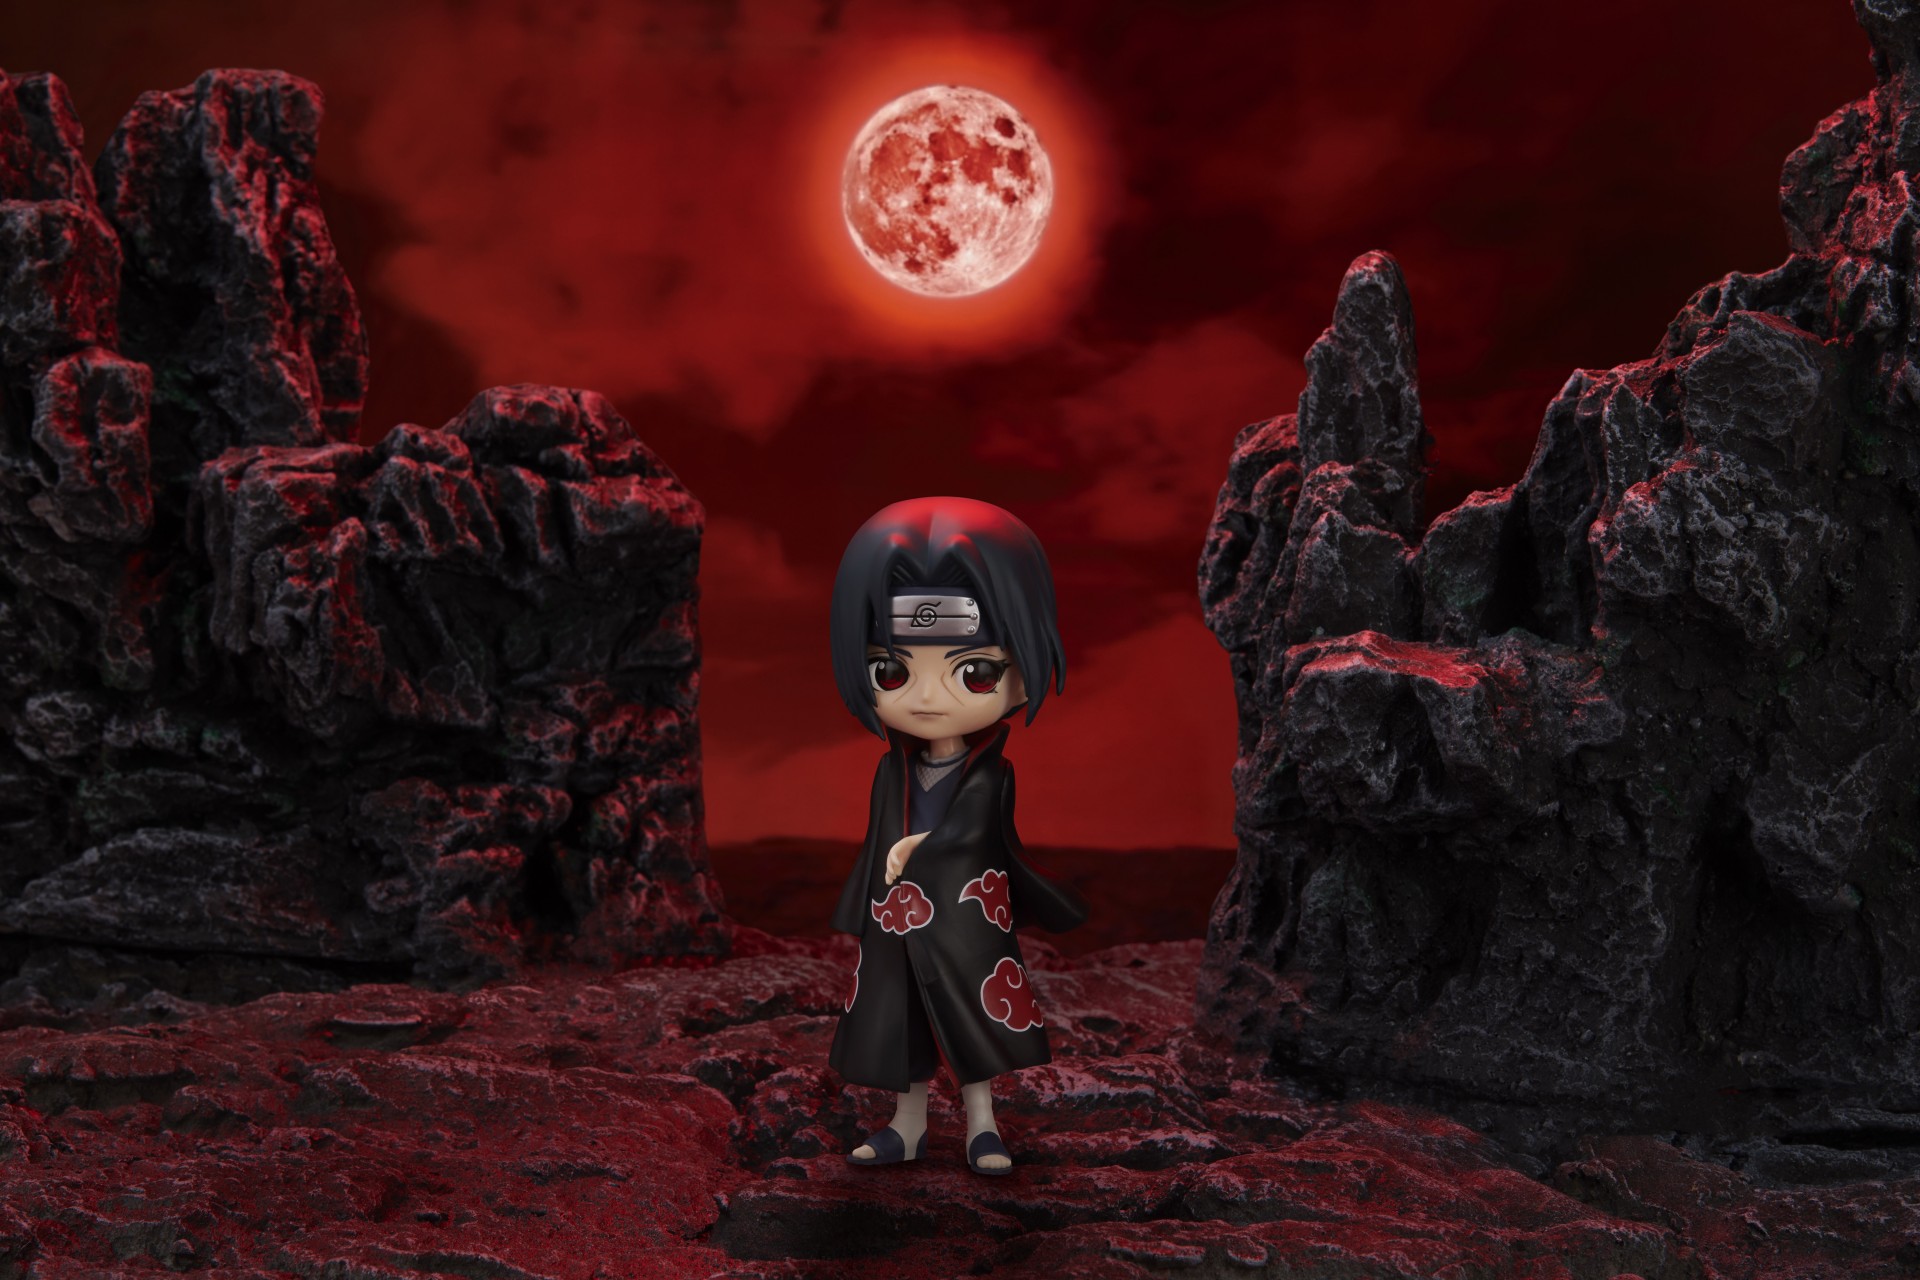 Itachi Coming Soon to the Q posket Series!